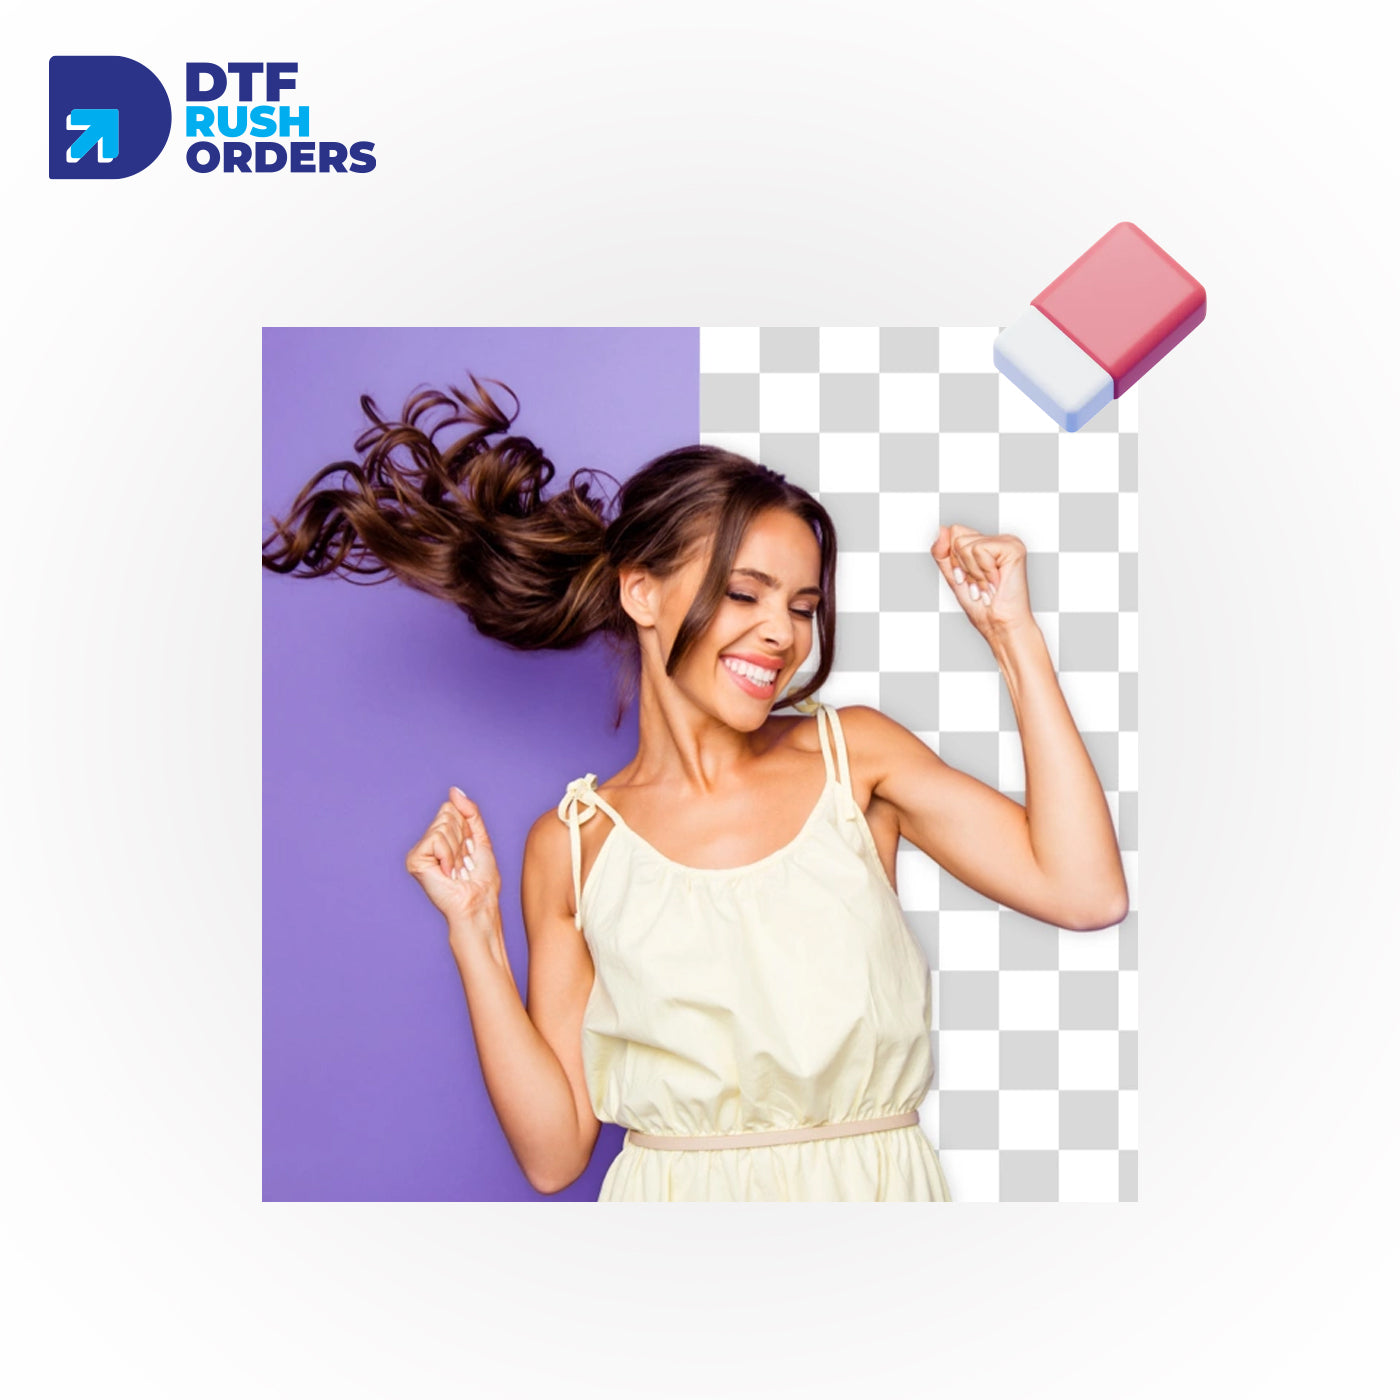 DTF Rush Orders Background Removal Service